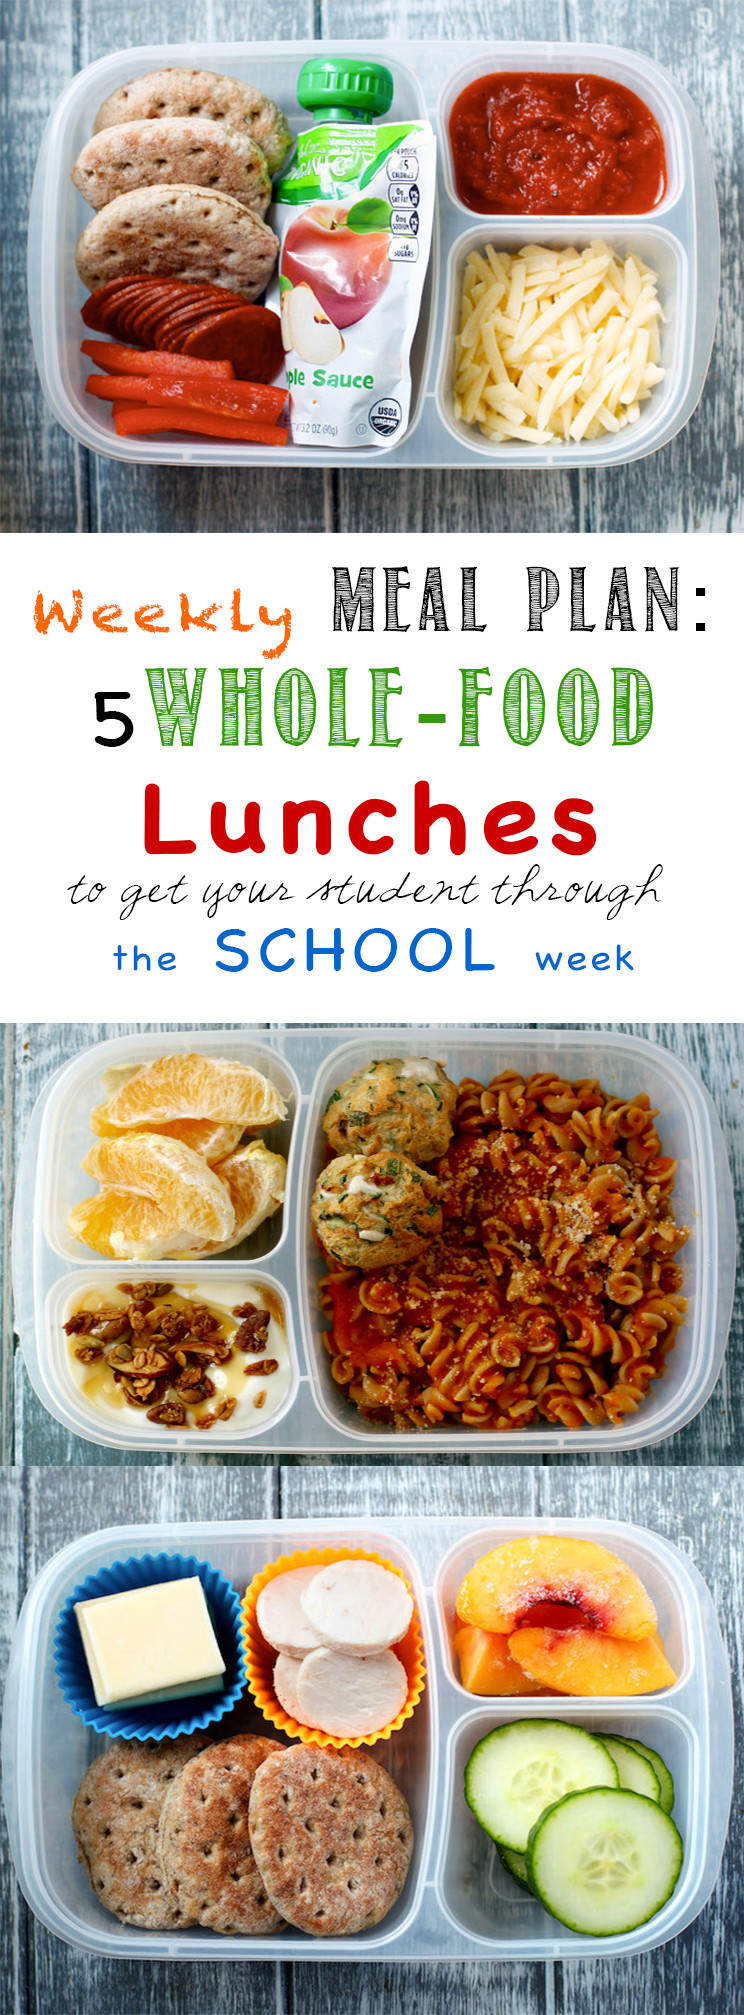 Weekly Meal Plan: School Lunch Edition - Planning lunches is monotonous and time consuming. This will help!